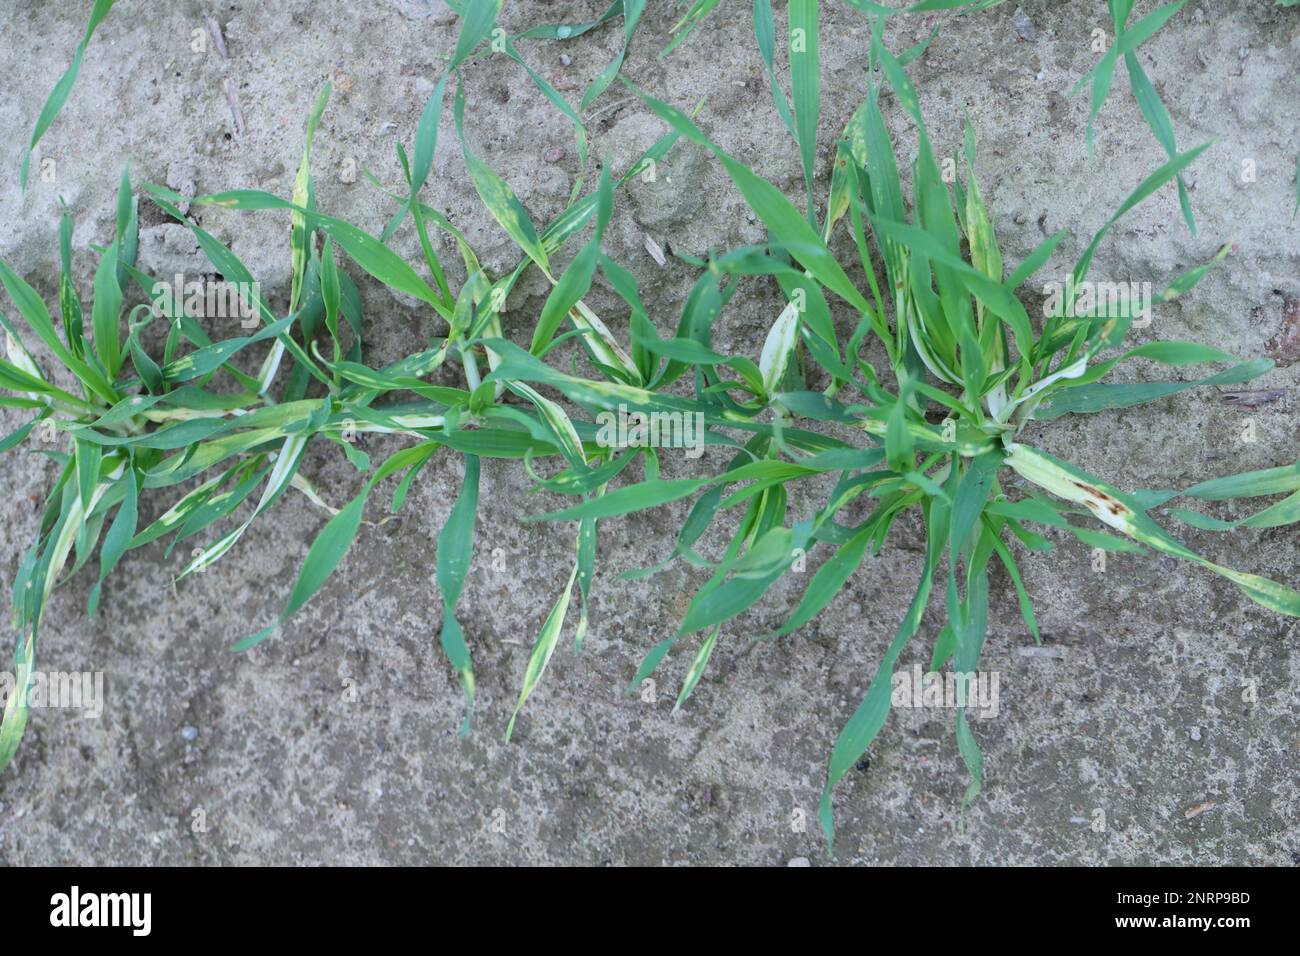 Young barley plants with symptoms of fungal disease, infection on leaves, chlorosis and dark spots. Stock Photo